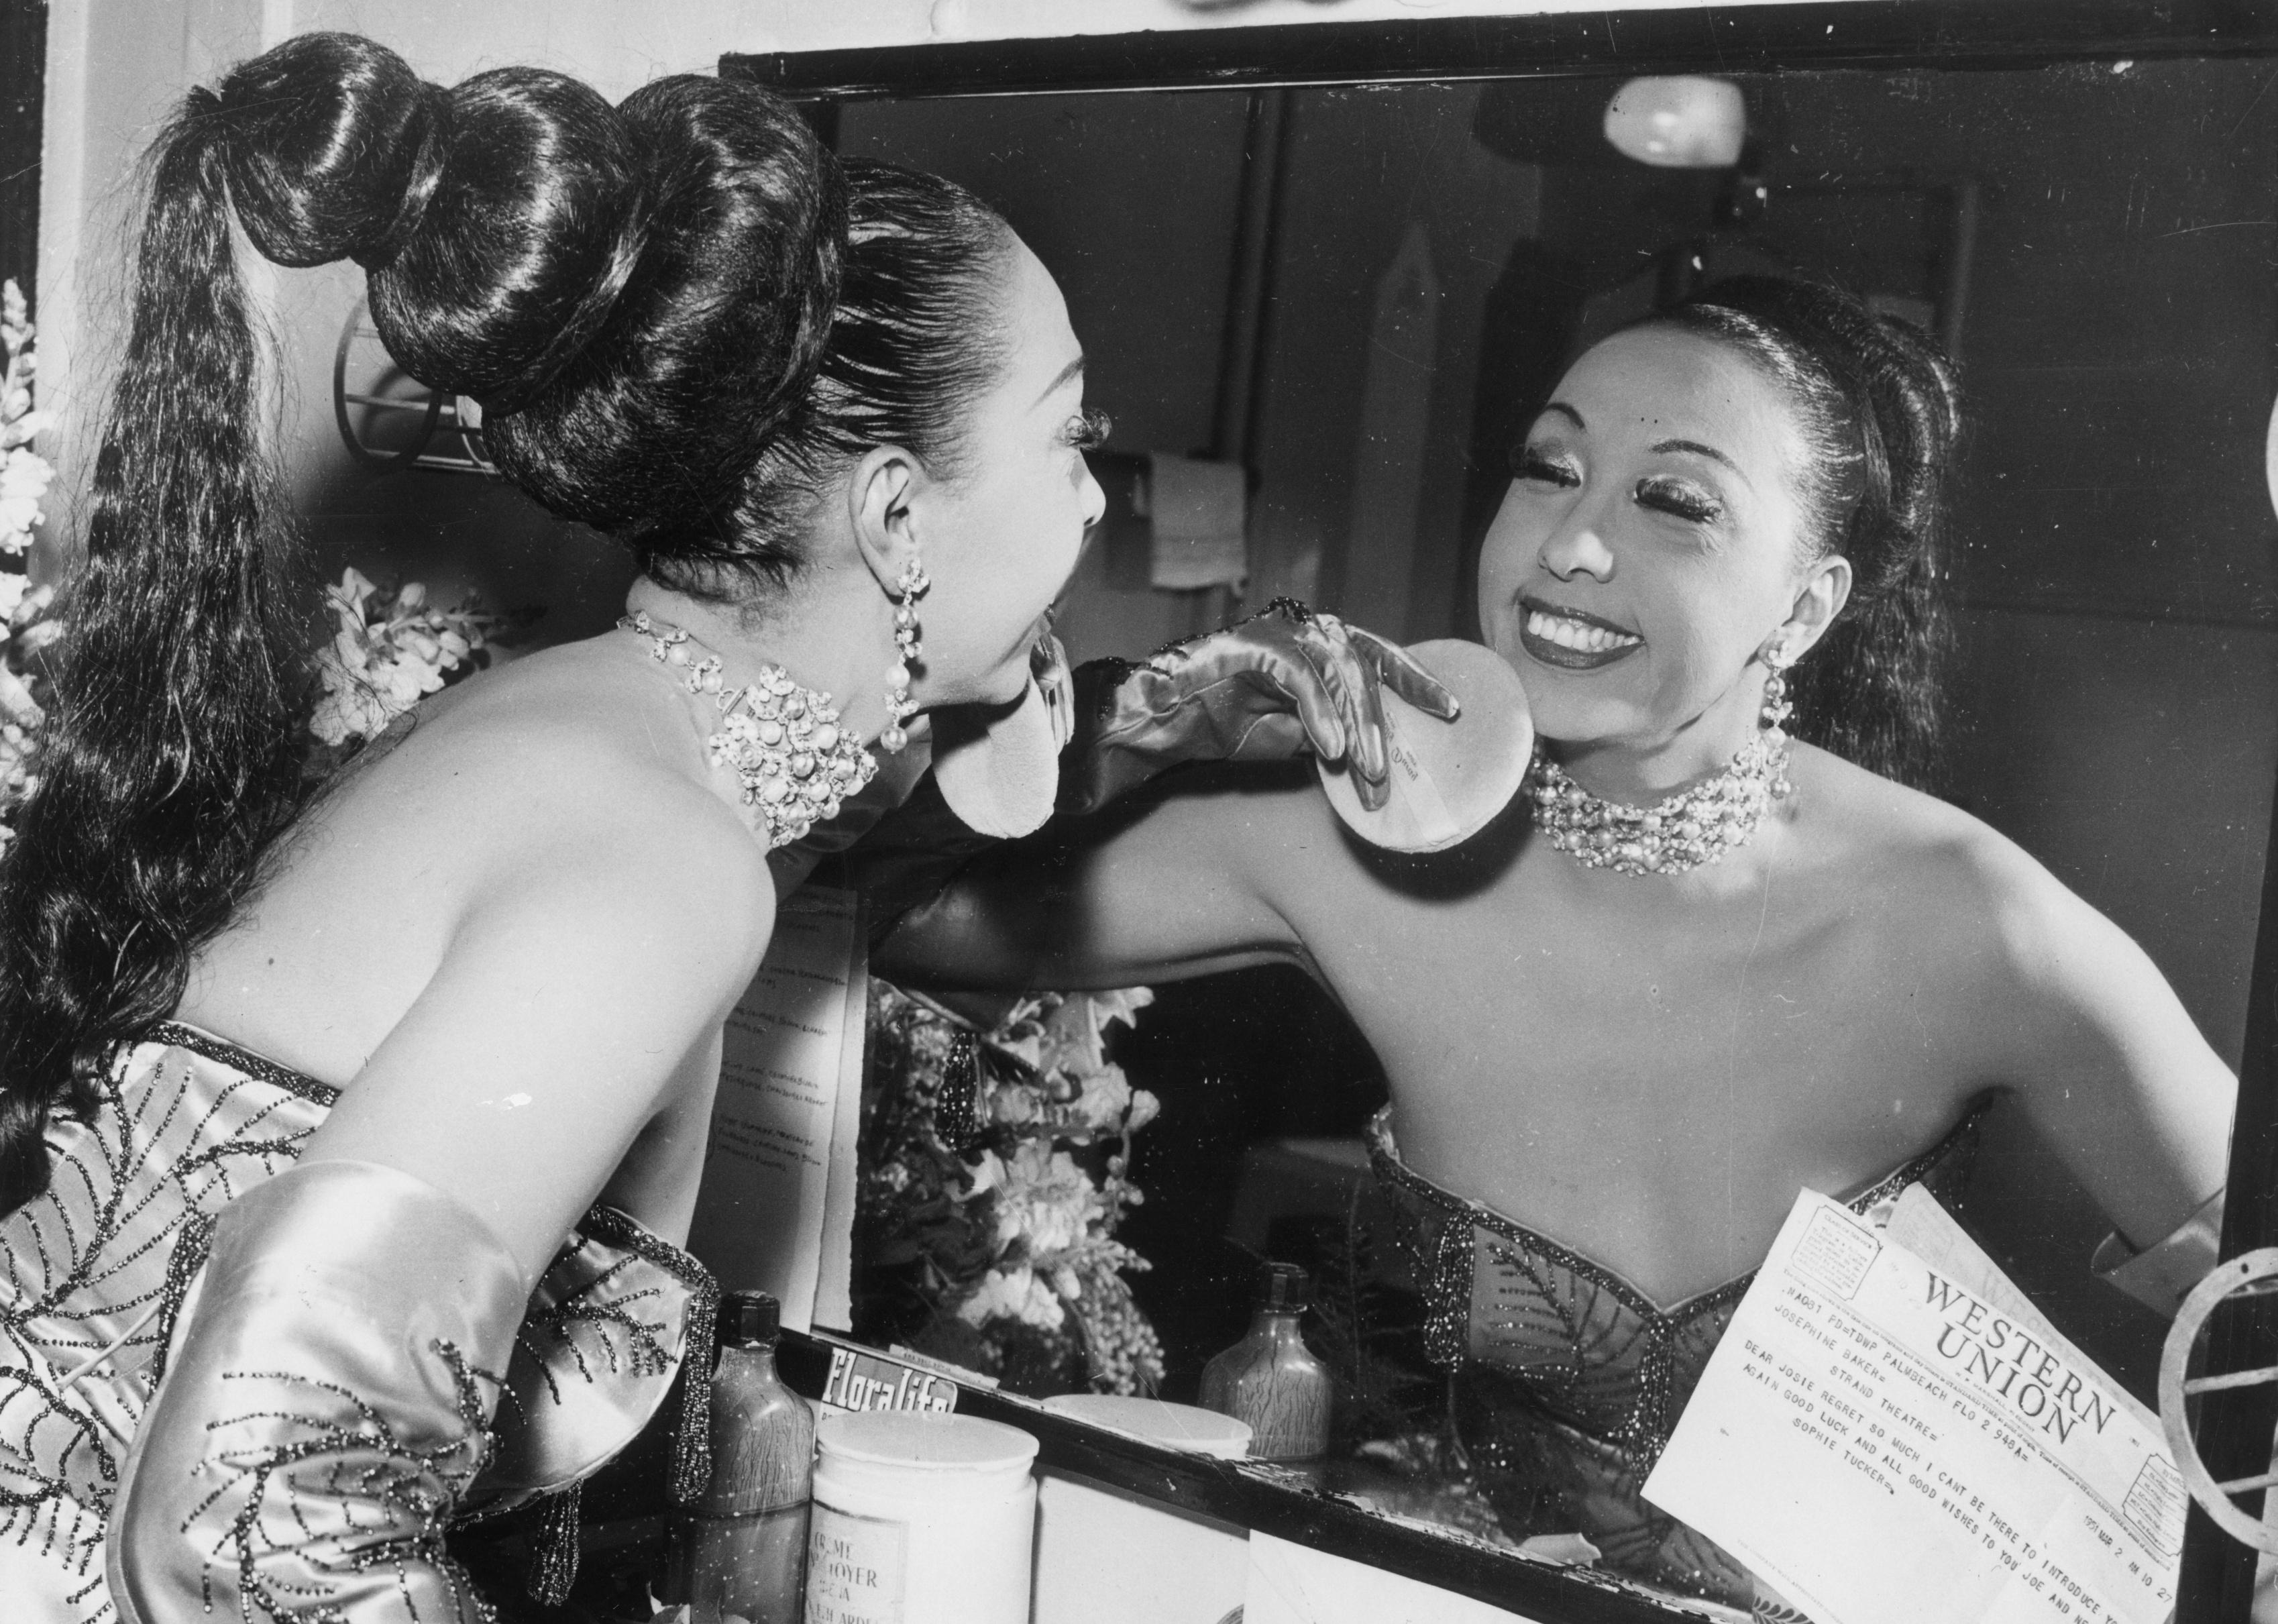 Josephine Baker applies makeup with a powder puff in her dressing room.